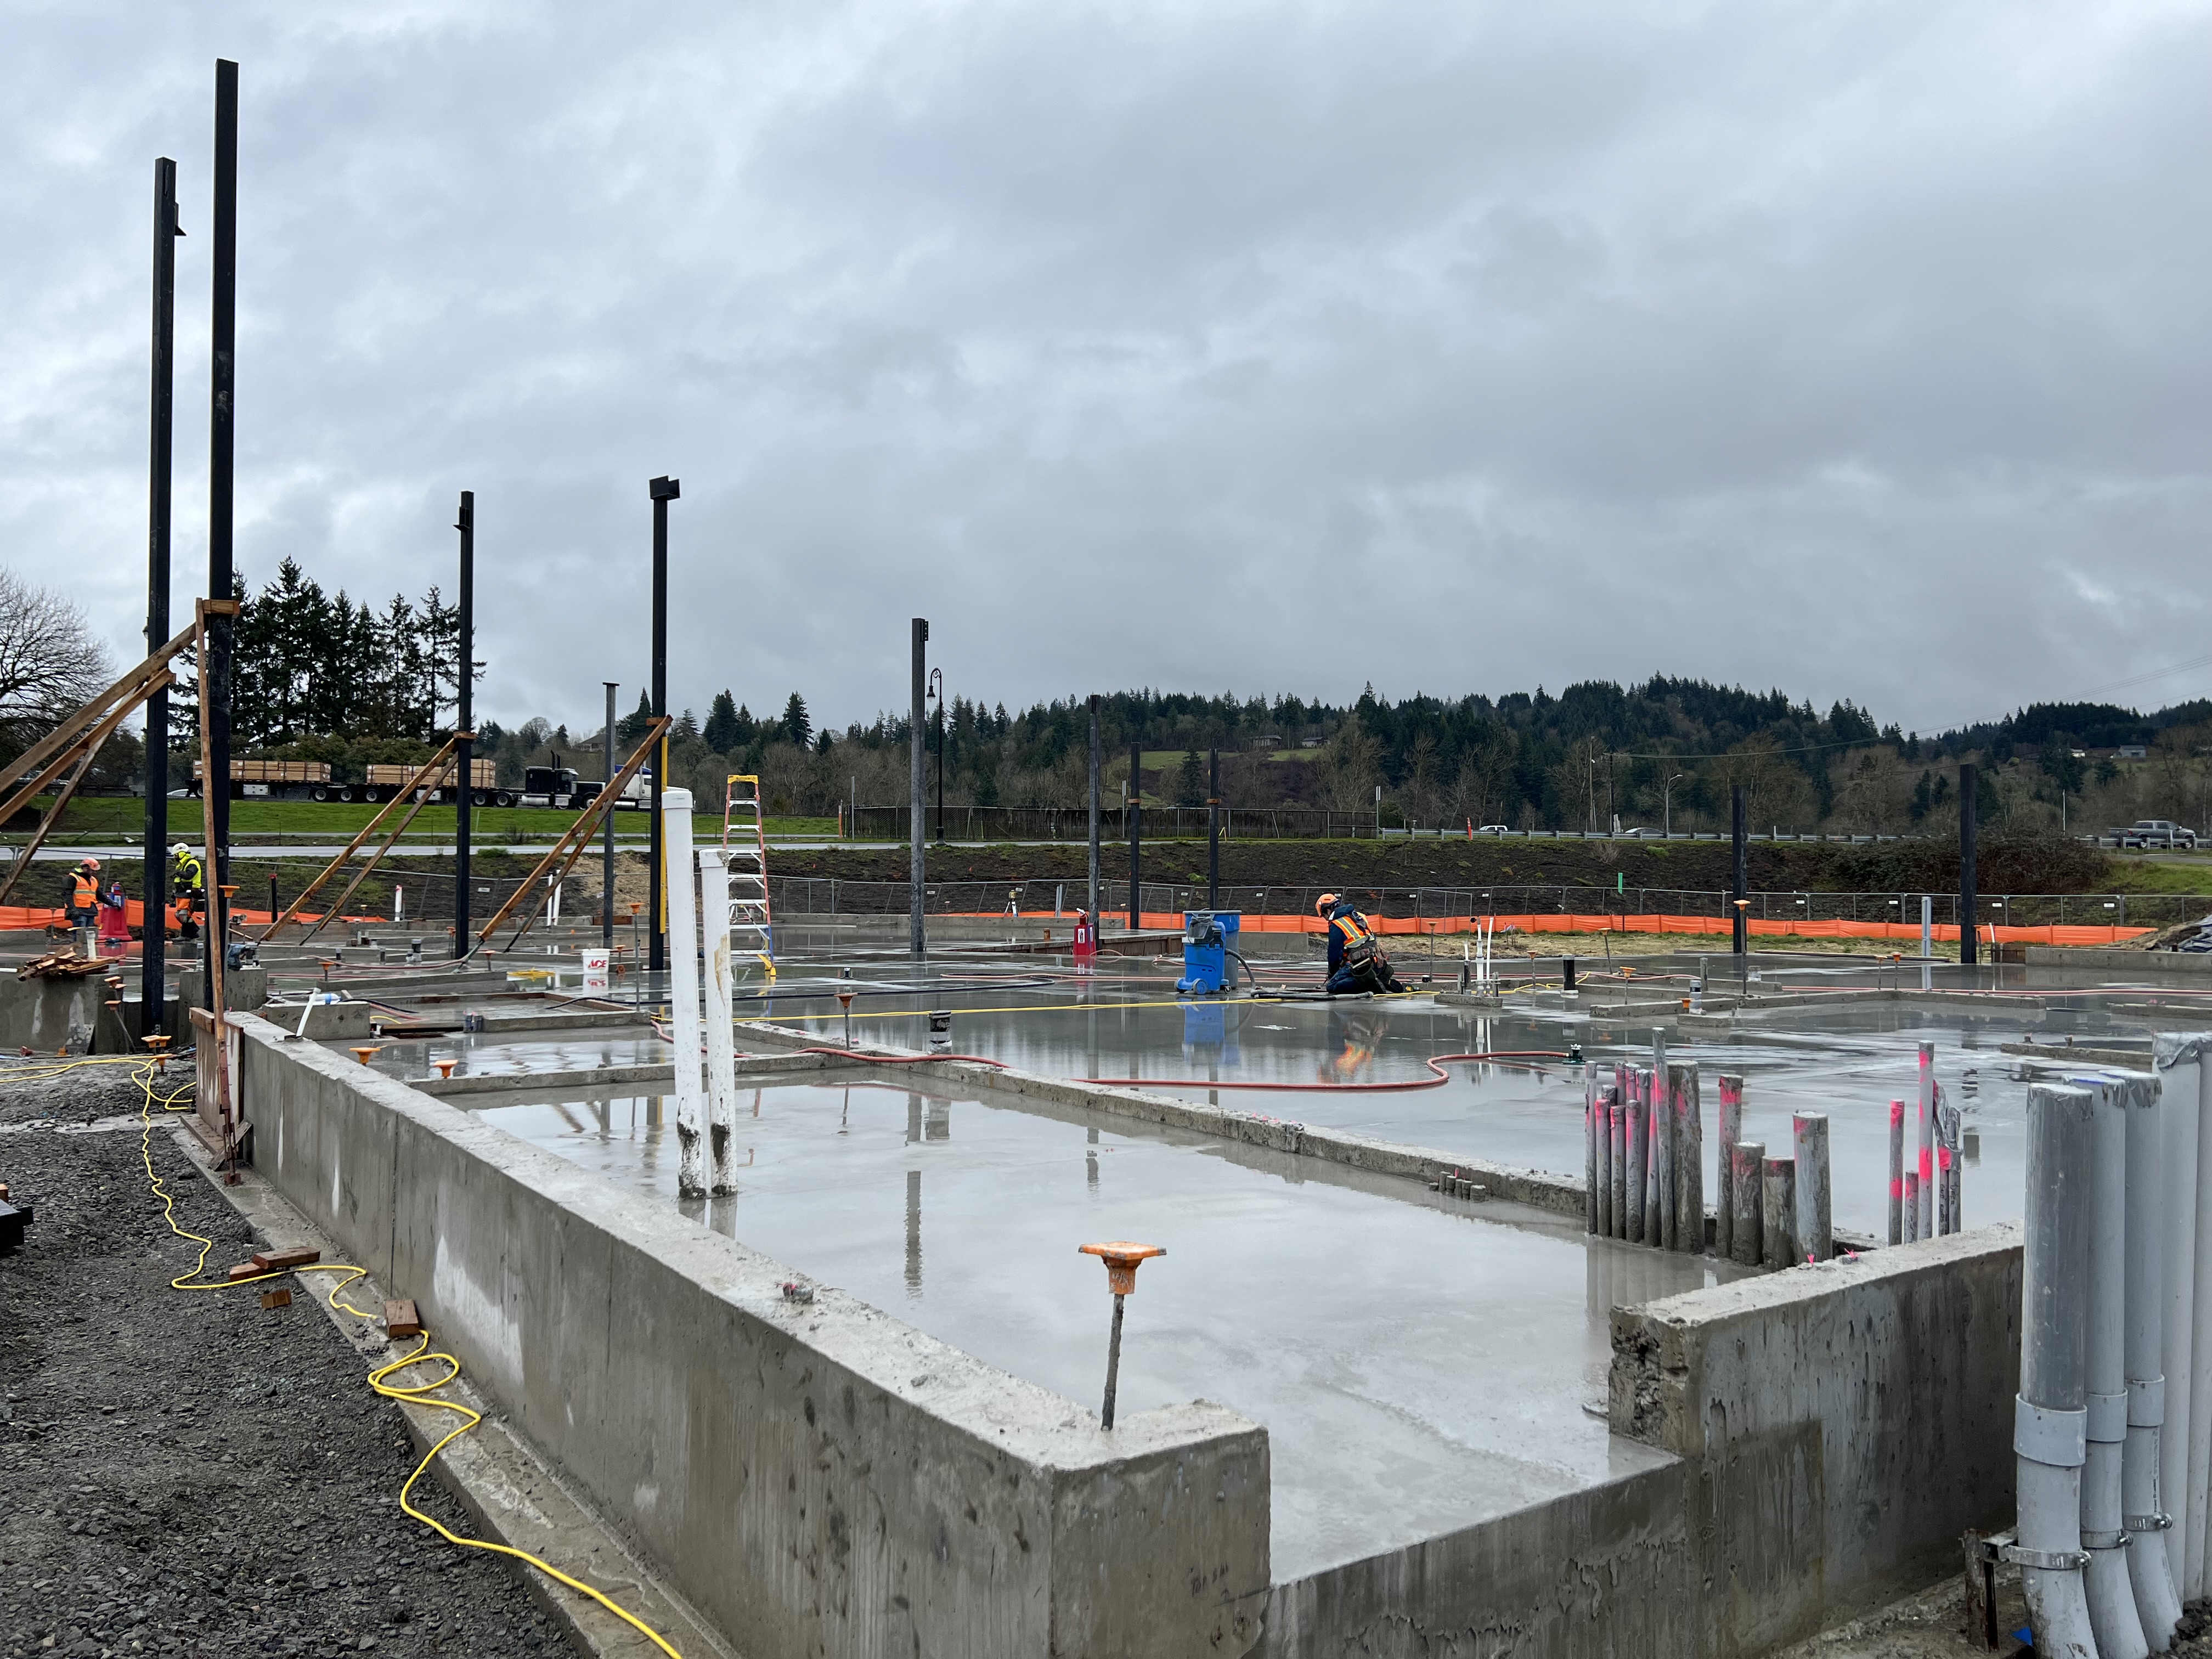 Picture of the freshly poured concrete floor of the future Woodland Community Library, slicked with rain, on a wet day